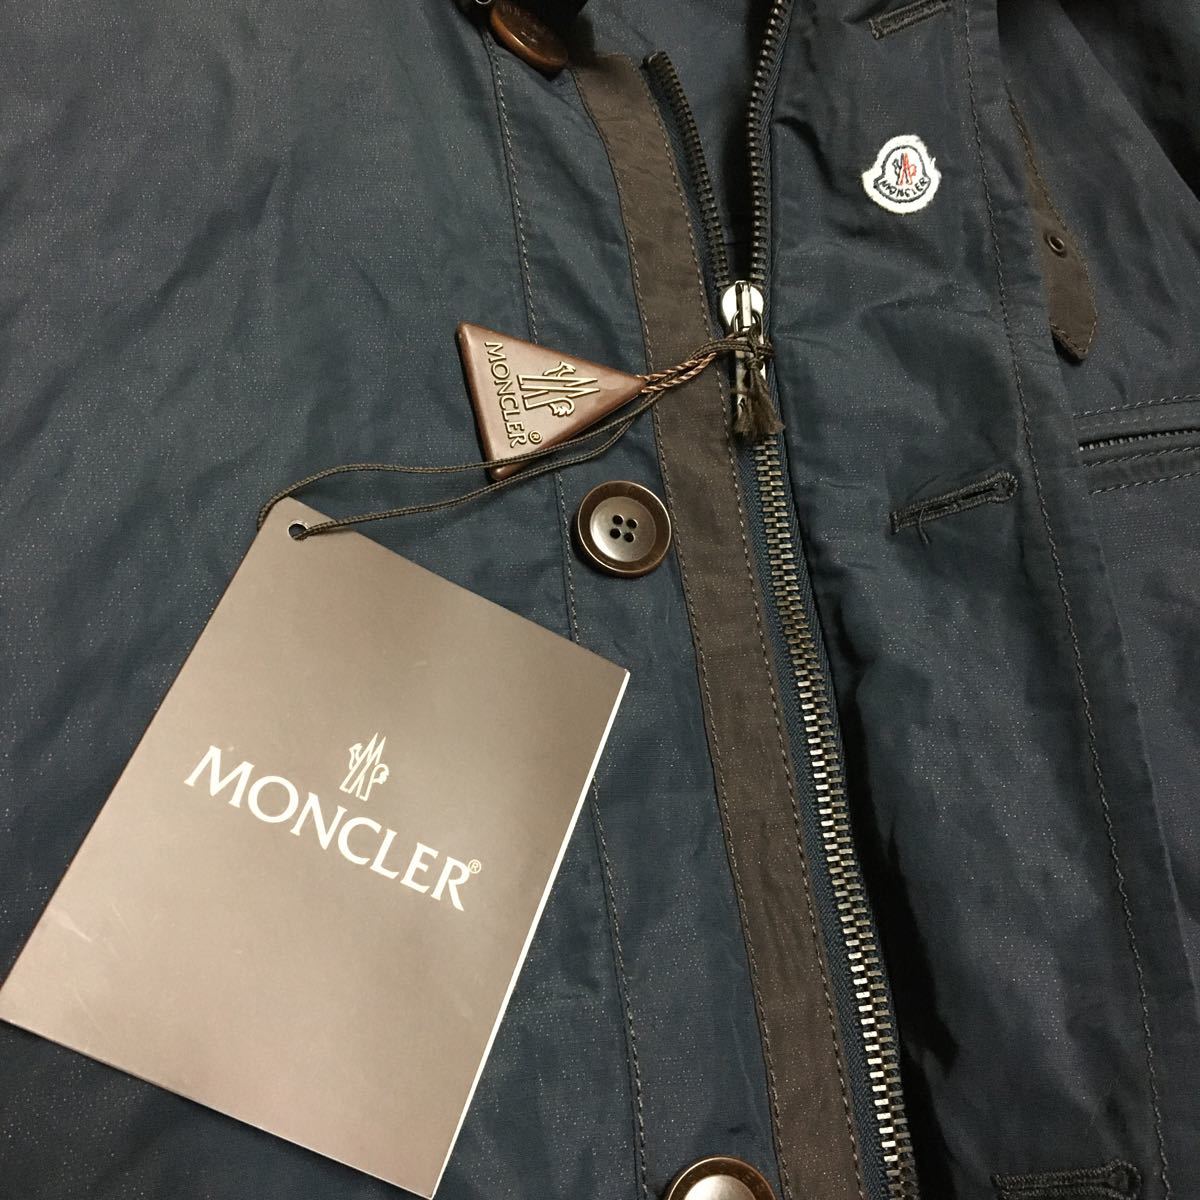 ★MONCLER モンクレール CERIMAN T1 775 NAVY新品★レア_画像4